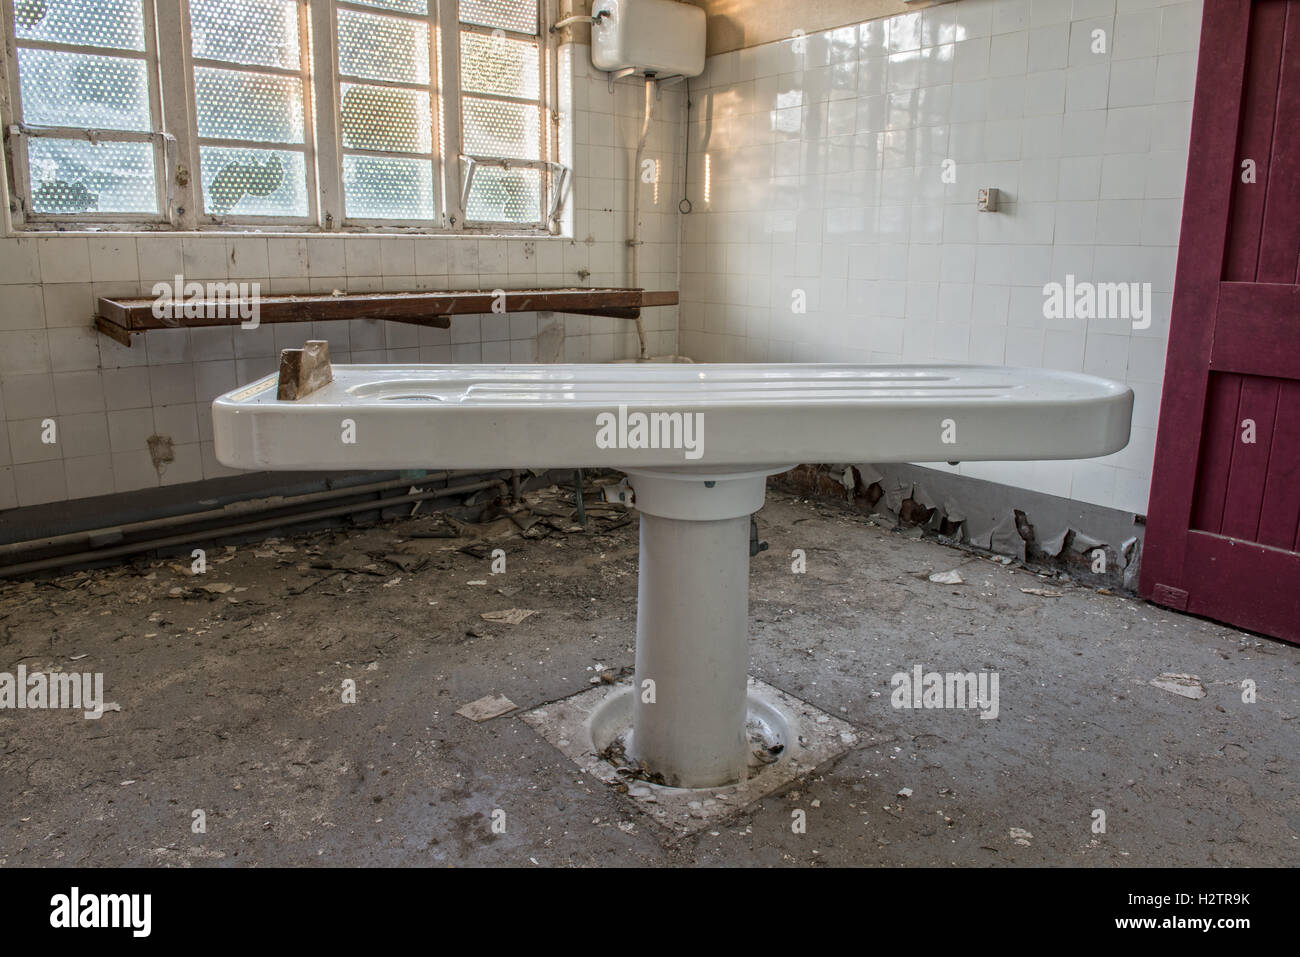 An increasingly rare porcelain autopsy table within the derelict Maiden Law Hospital Mortuary, Lanchester, County Durham, UK Stock Photo